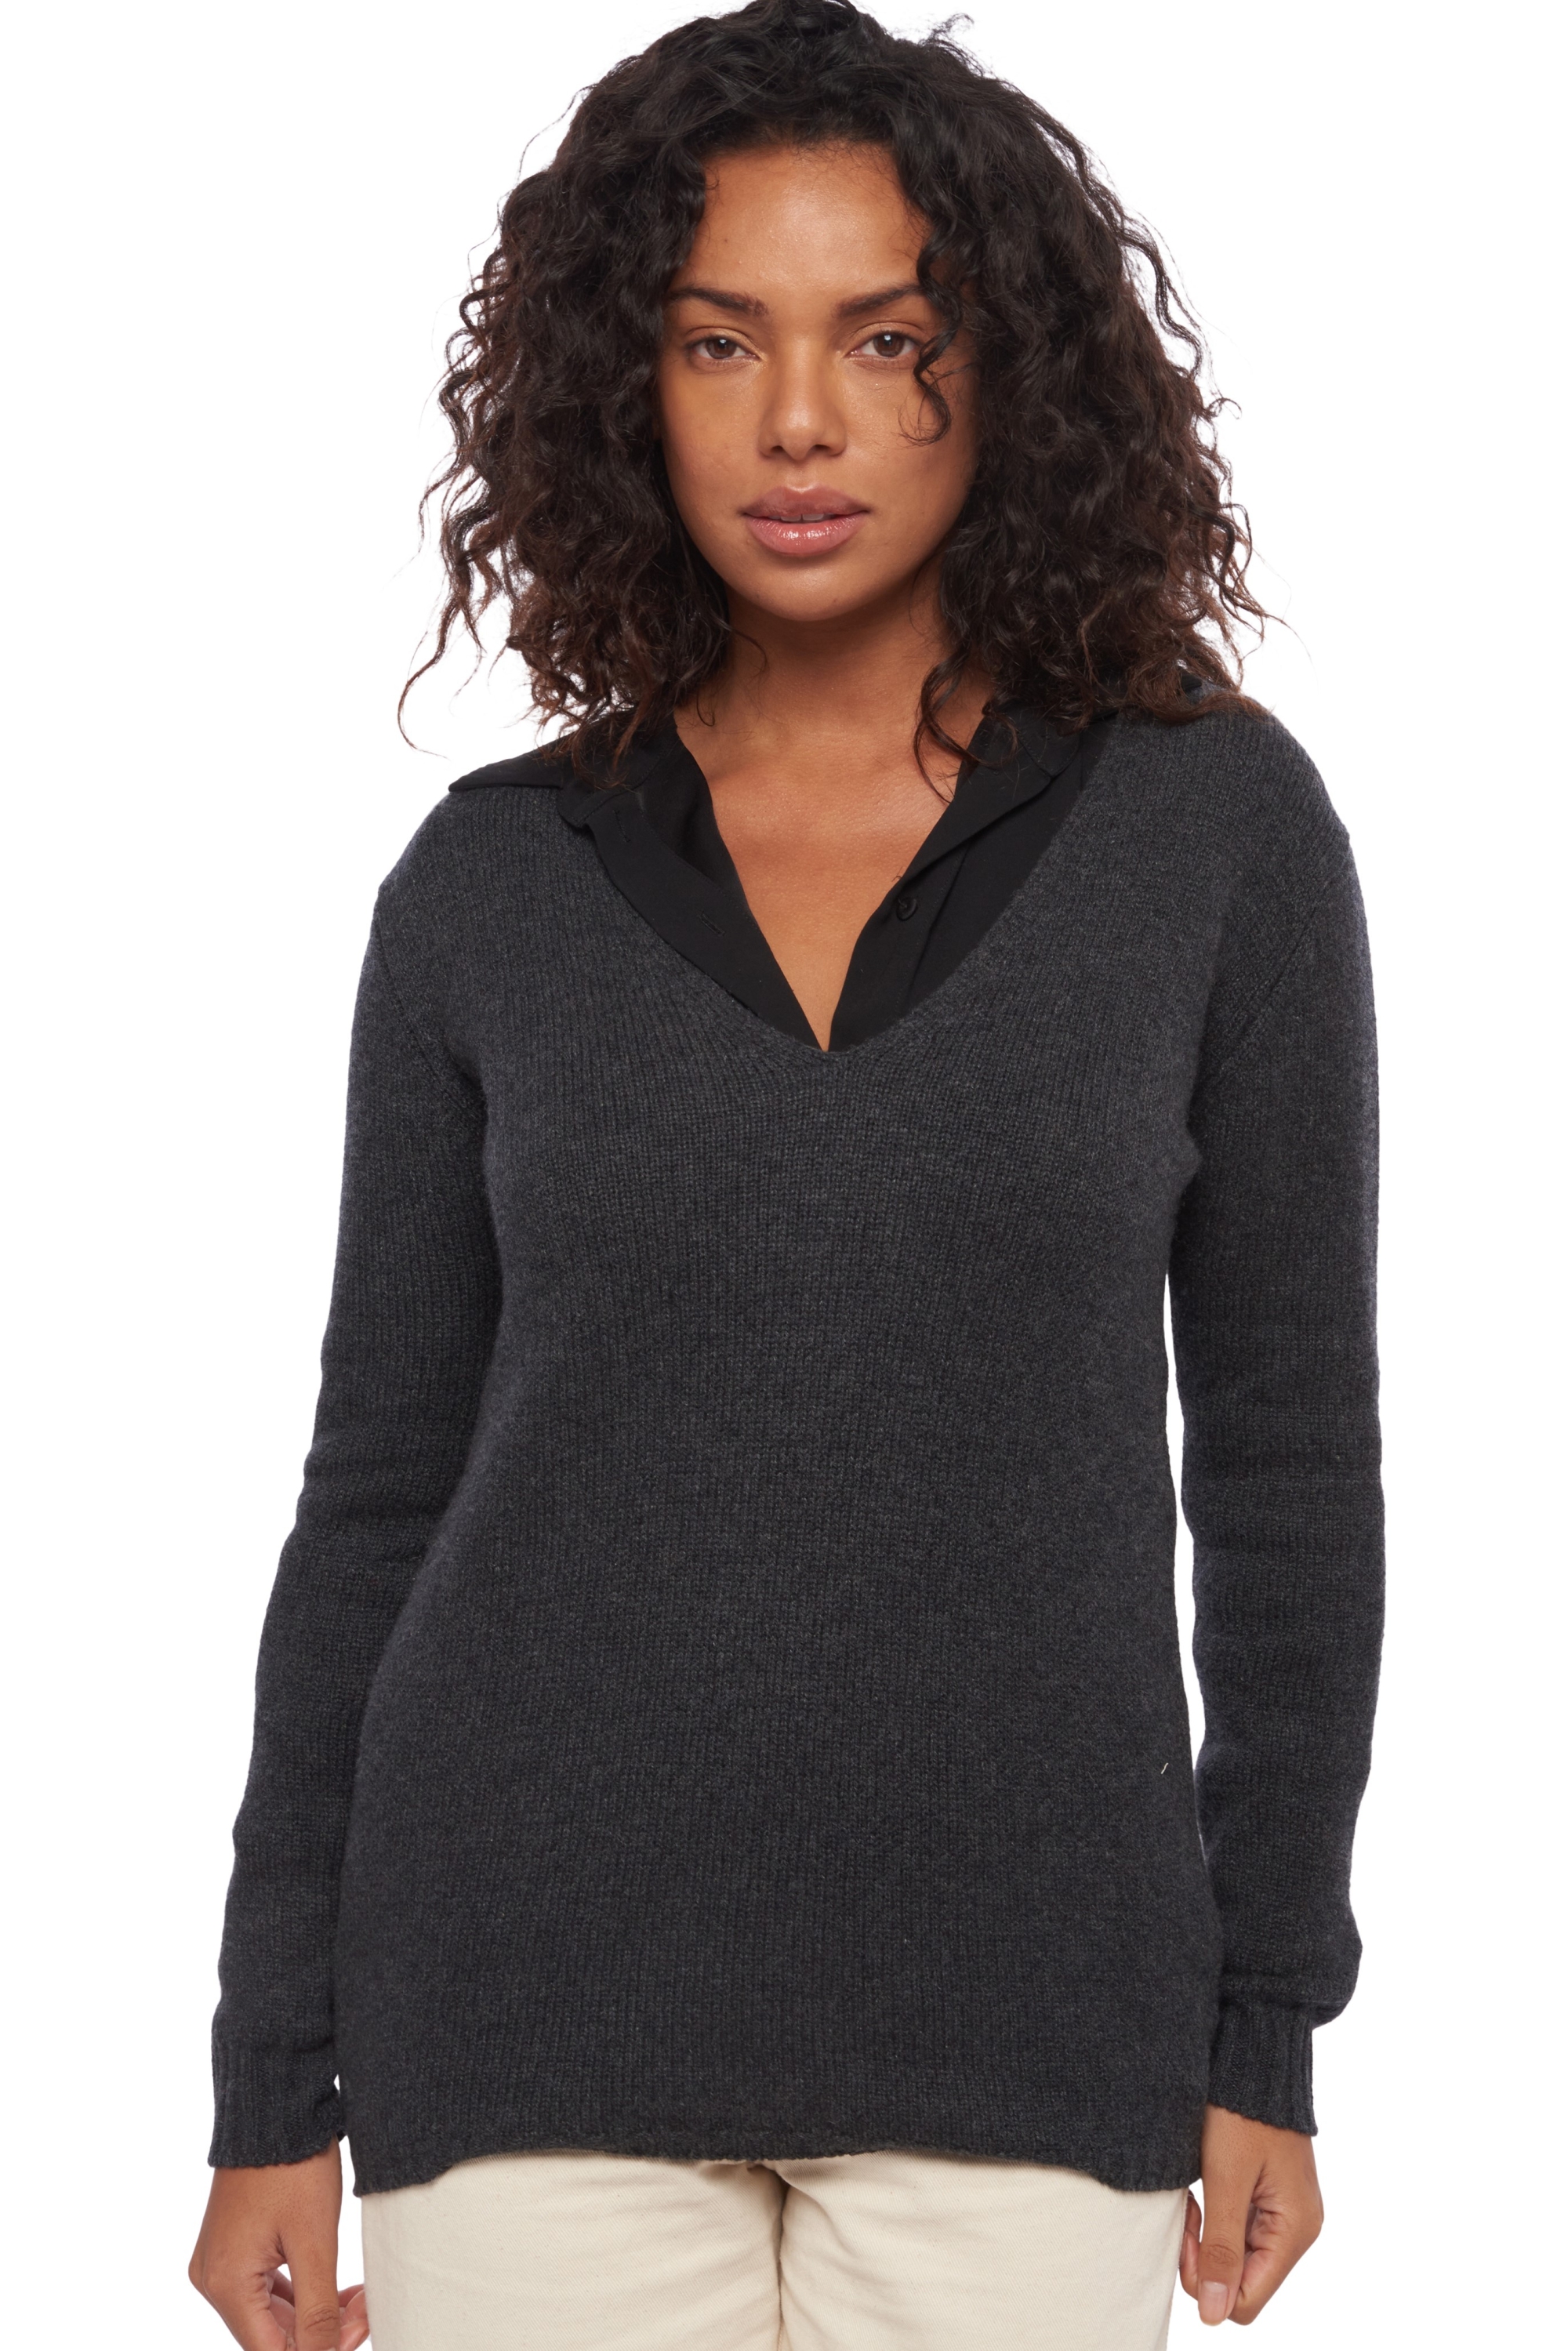 Cashmere ladies timeless classics vanessa charcoal marl s